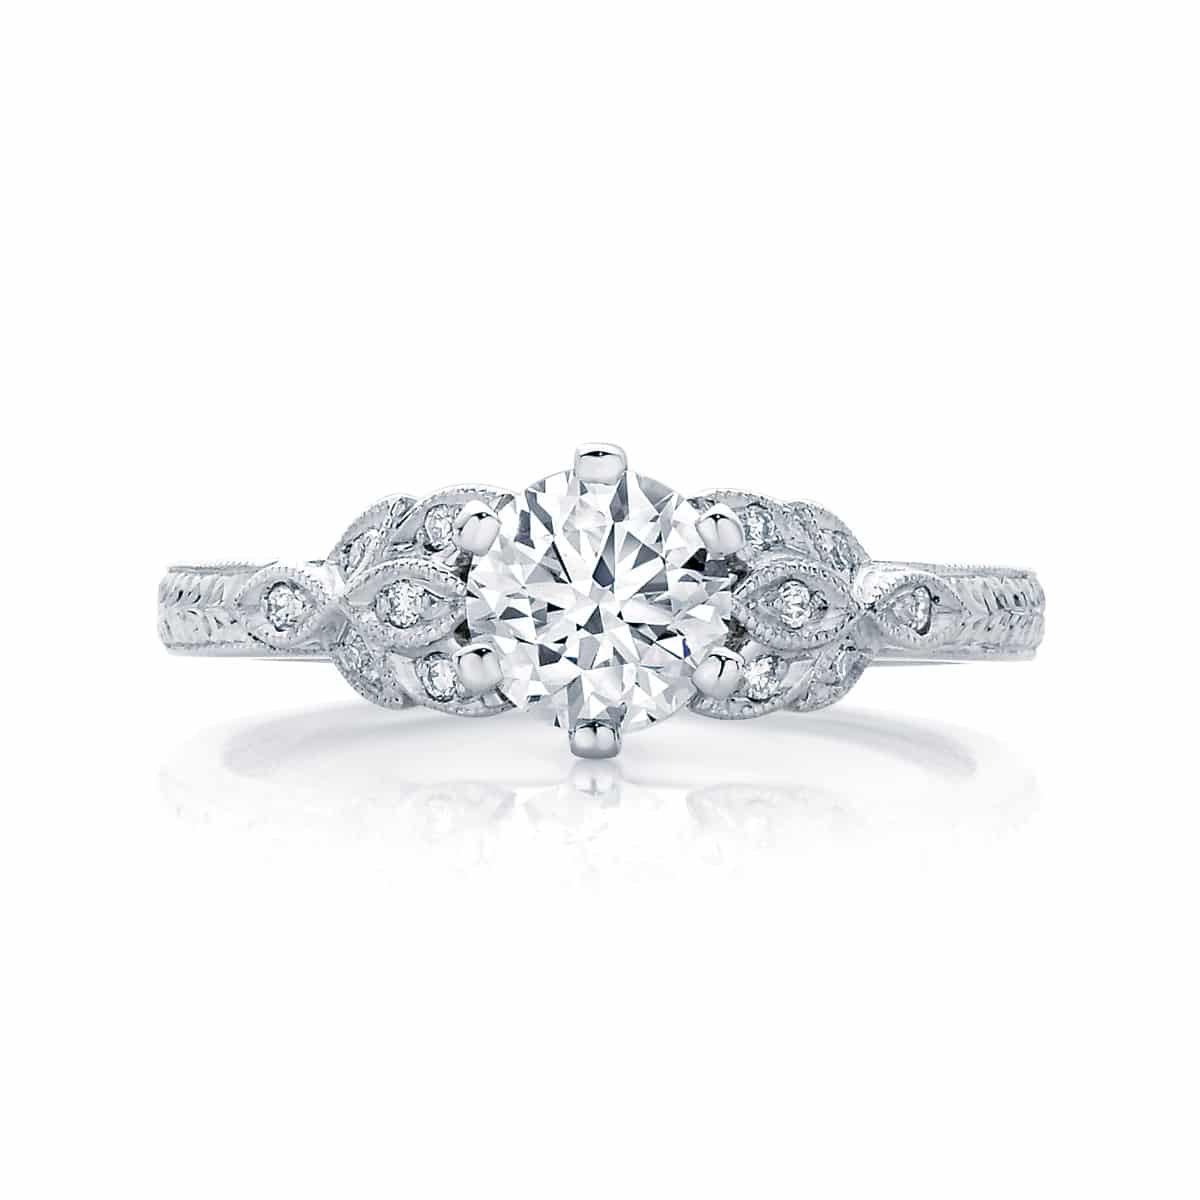 Round Engraved Engagement Ring White Gold | Morning Star II